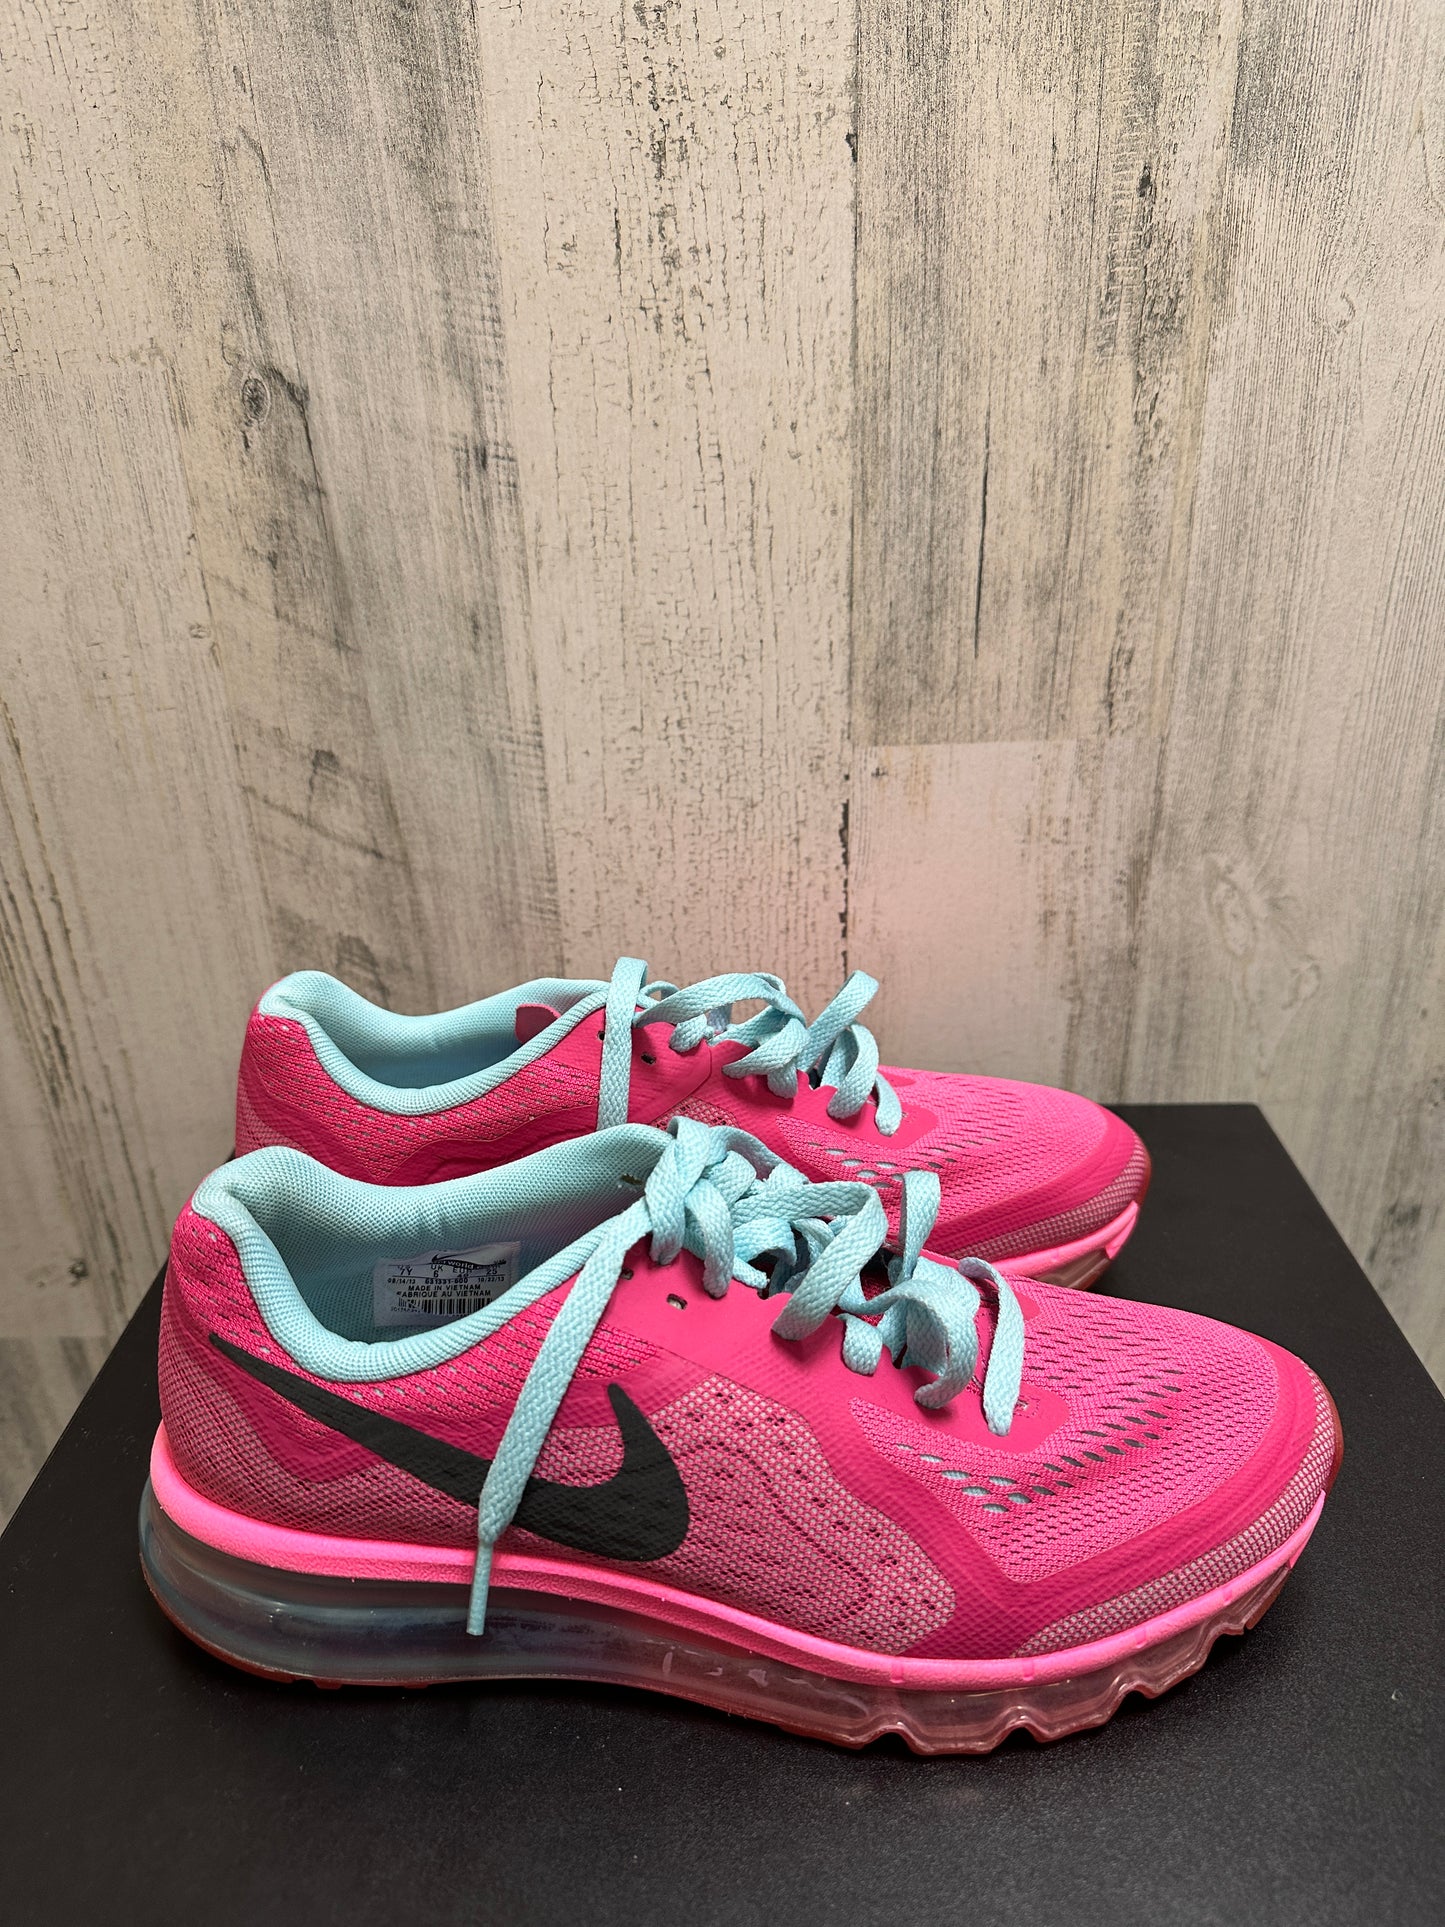 Shoes Athletic By Nike  Size: 7